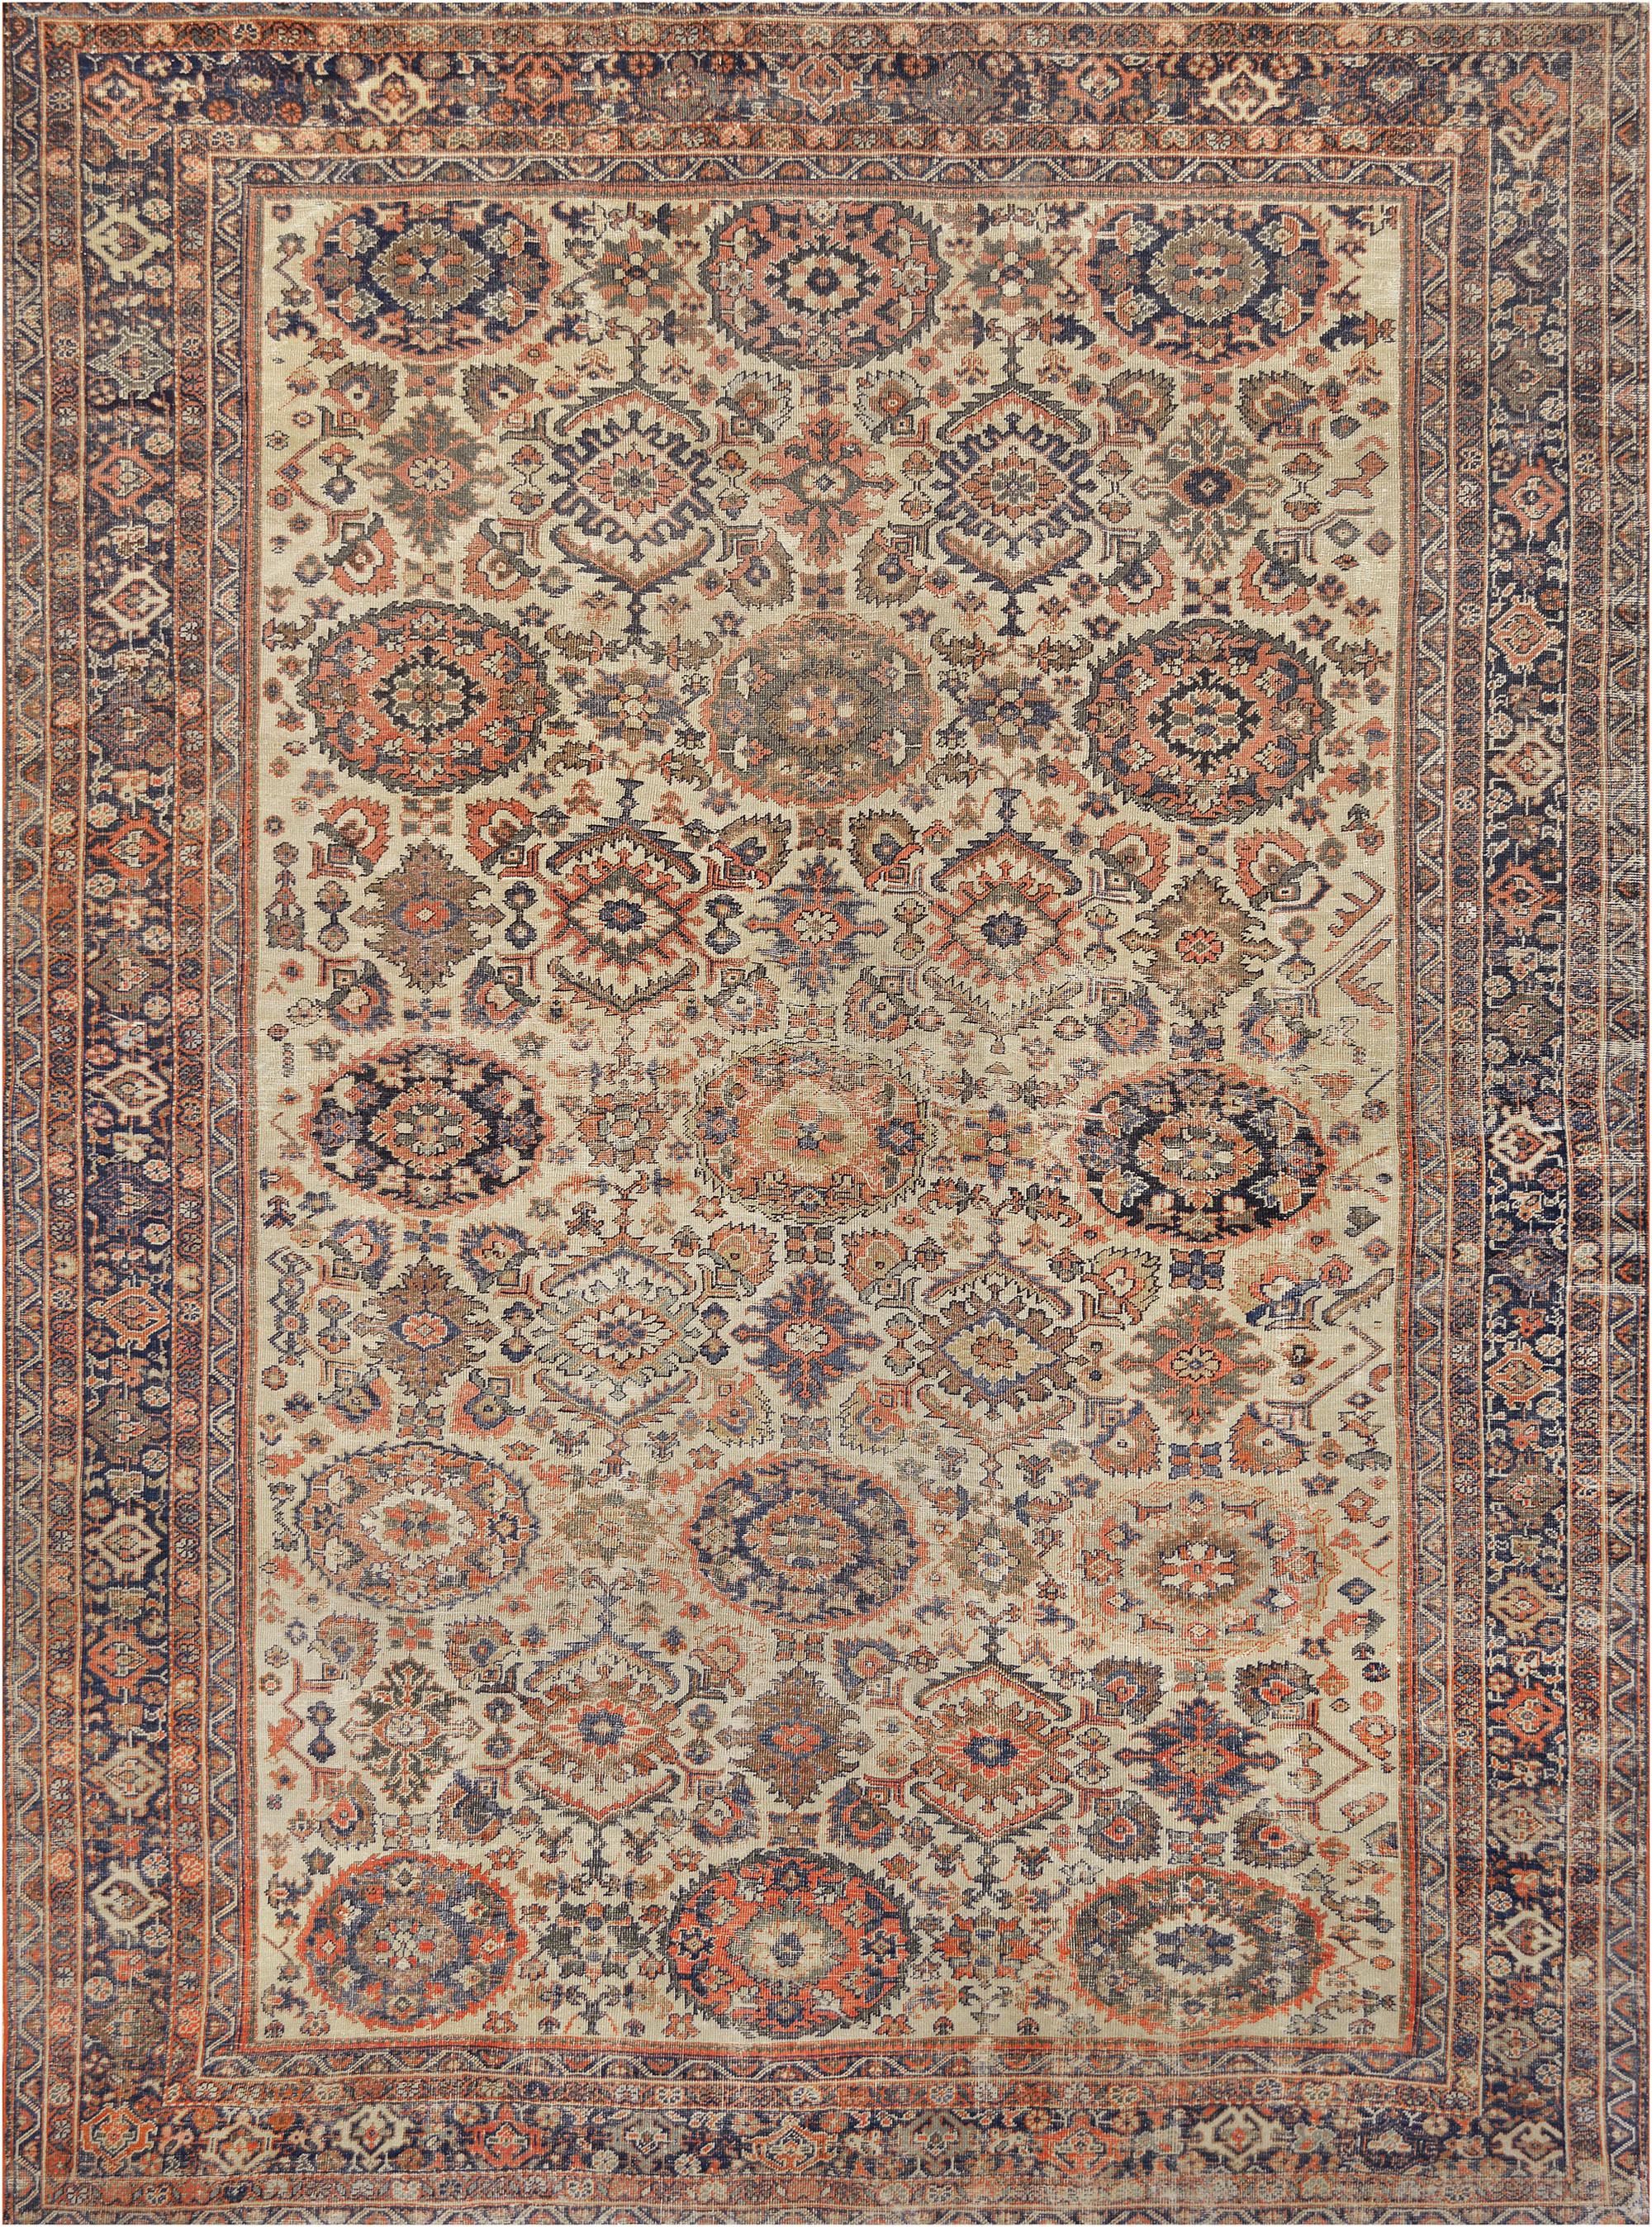 Persian Hand-Woven Wool Sultanabad Rug Circa Late 19th Century For Sale